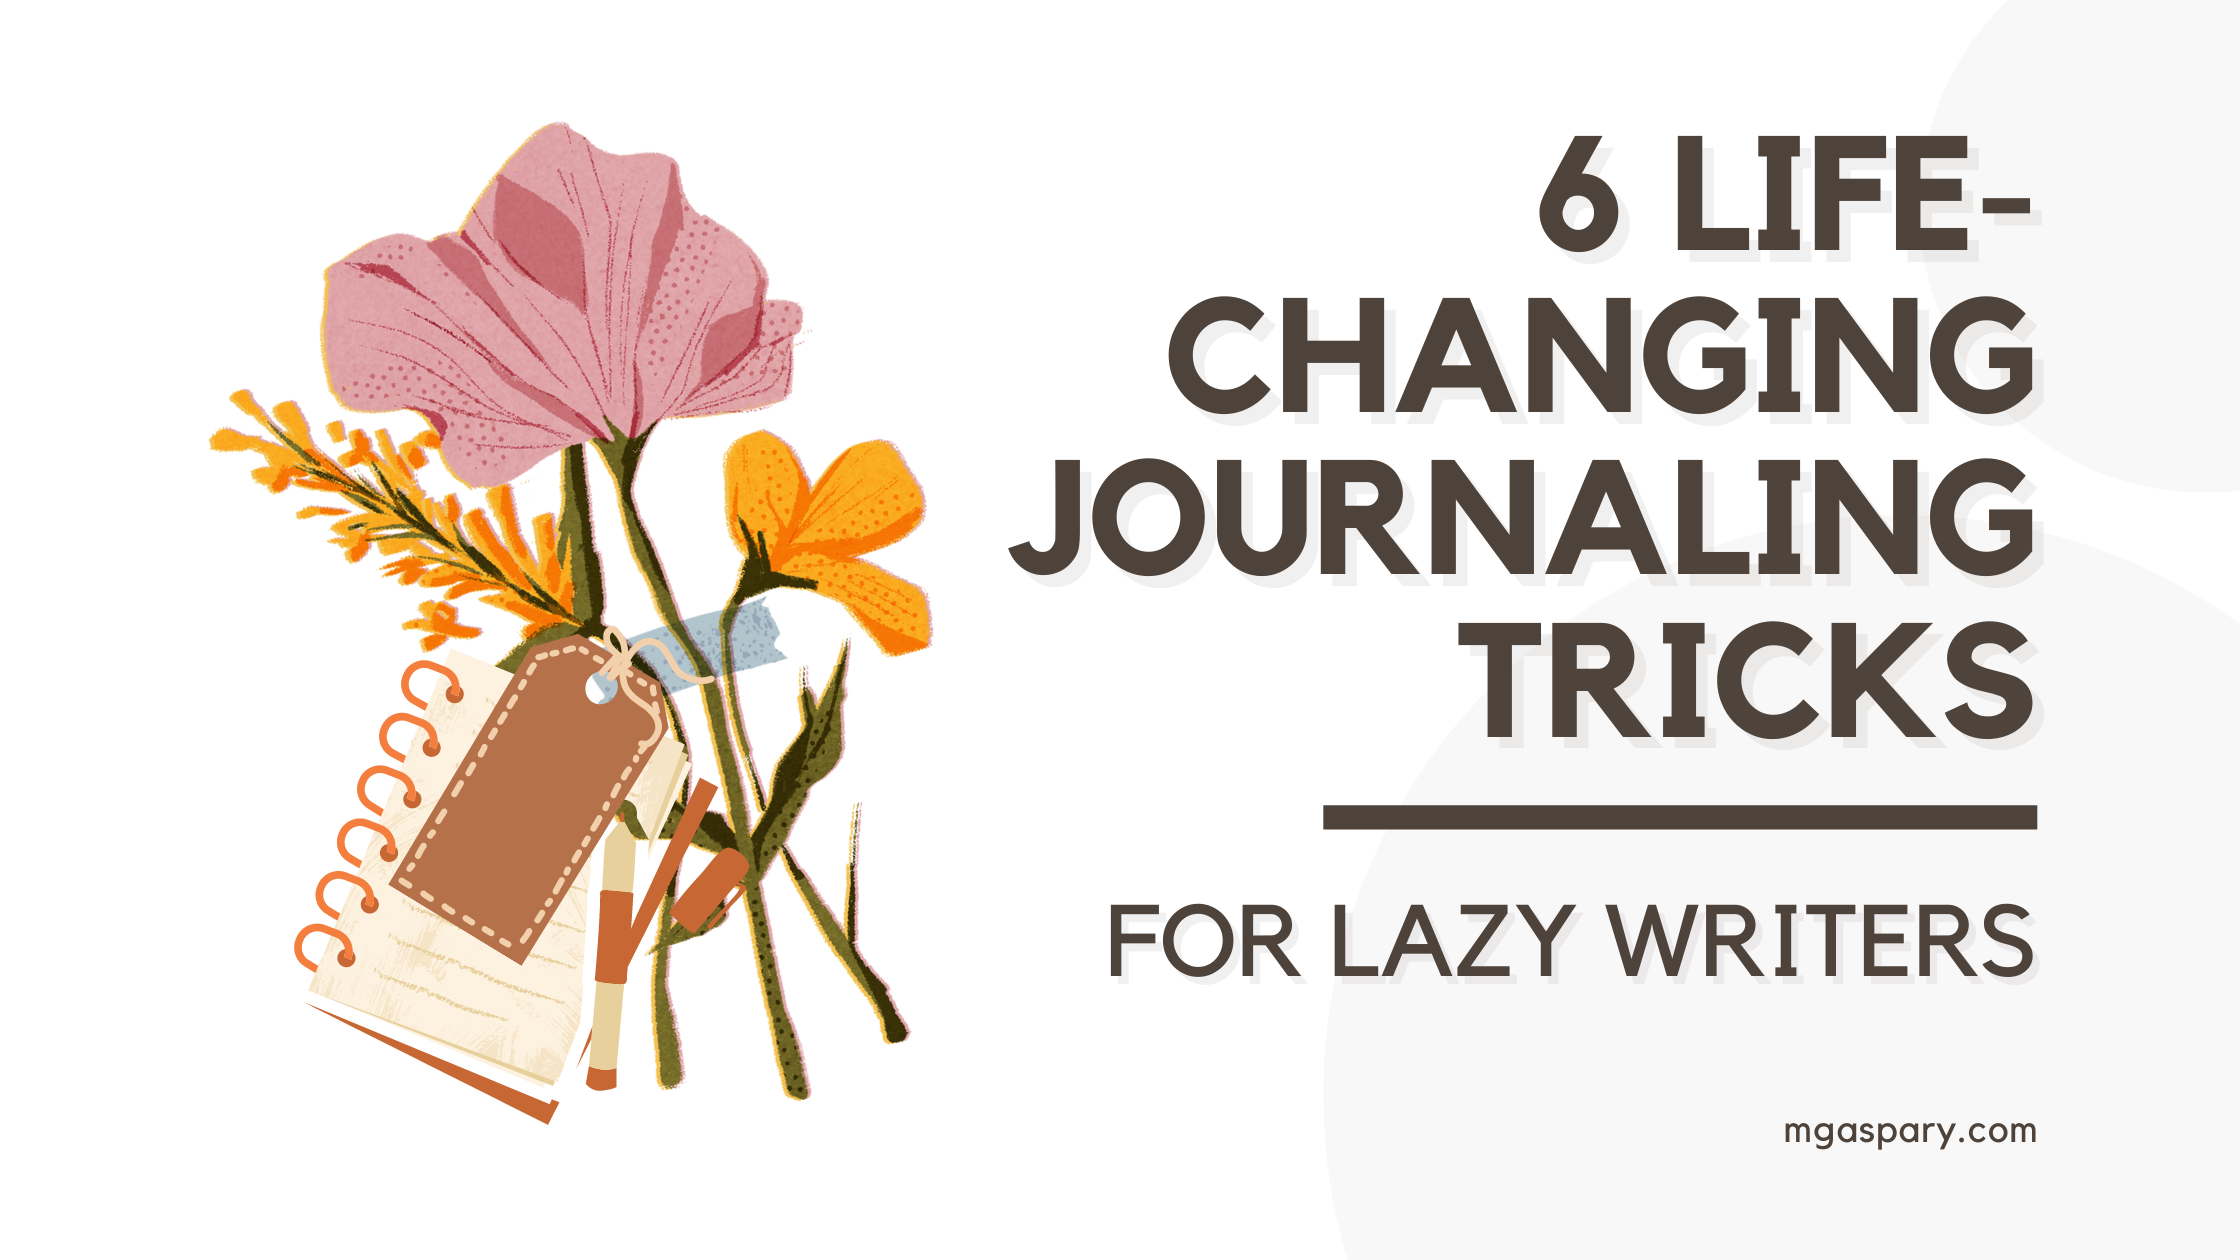 6 Life-Changing Journaling Tricks For Lazy Writers